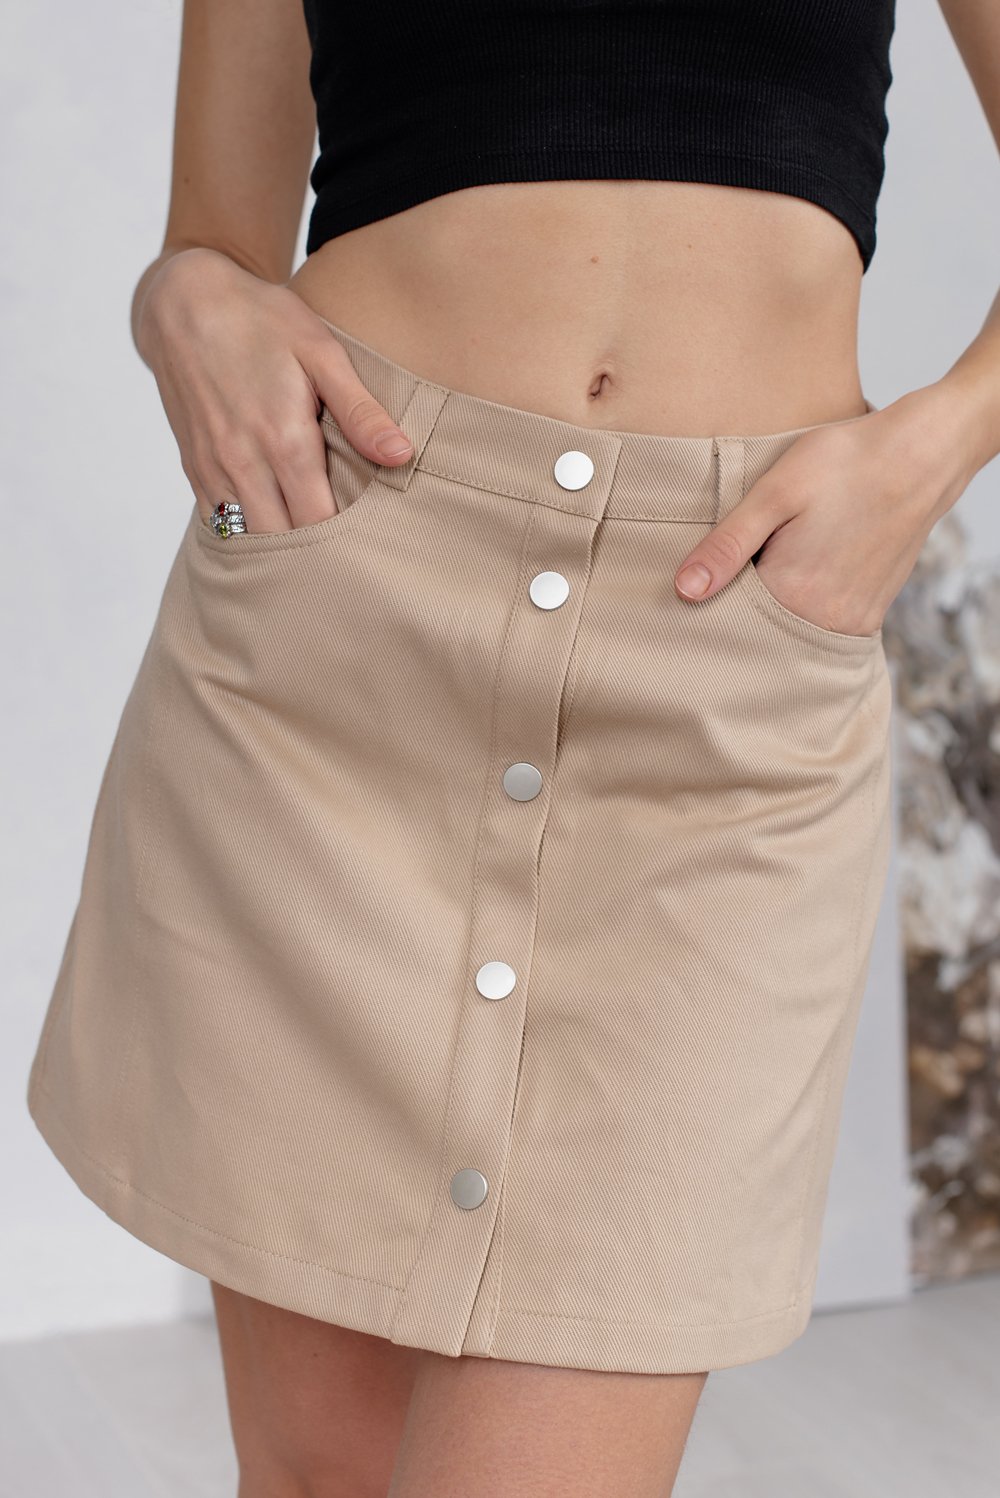 Beige mini skirt with pockets